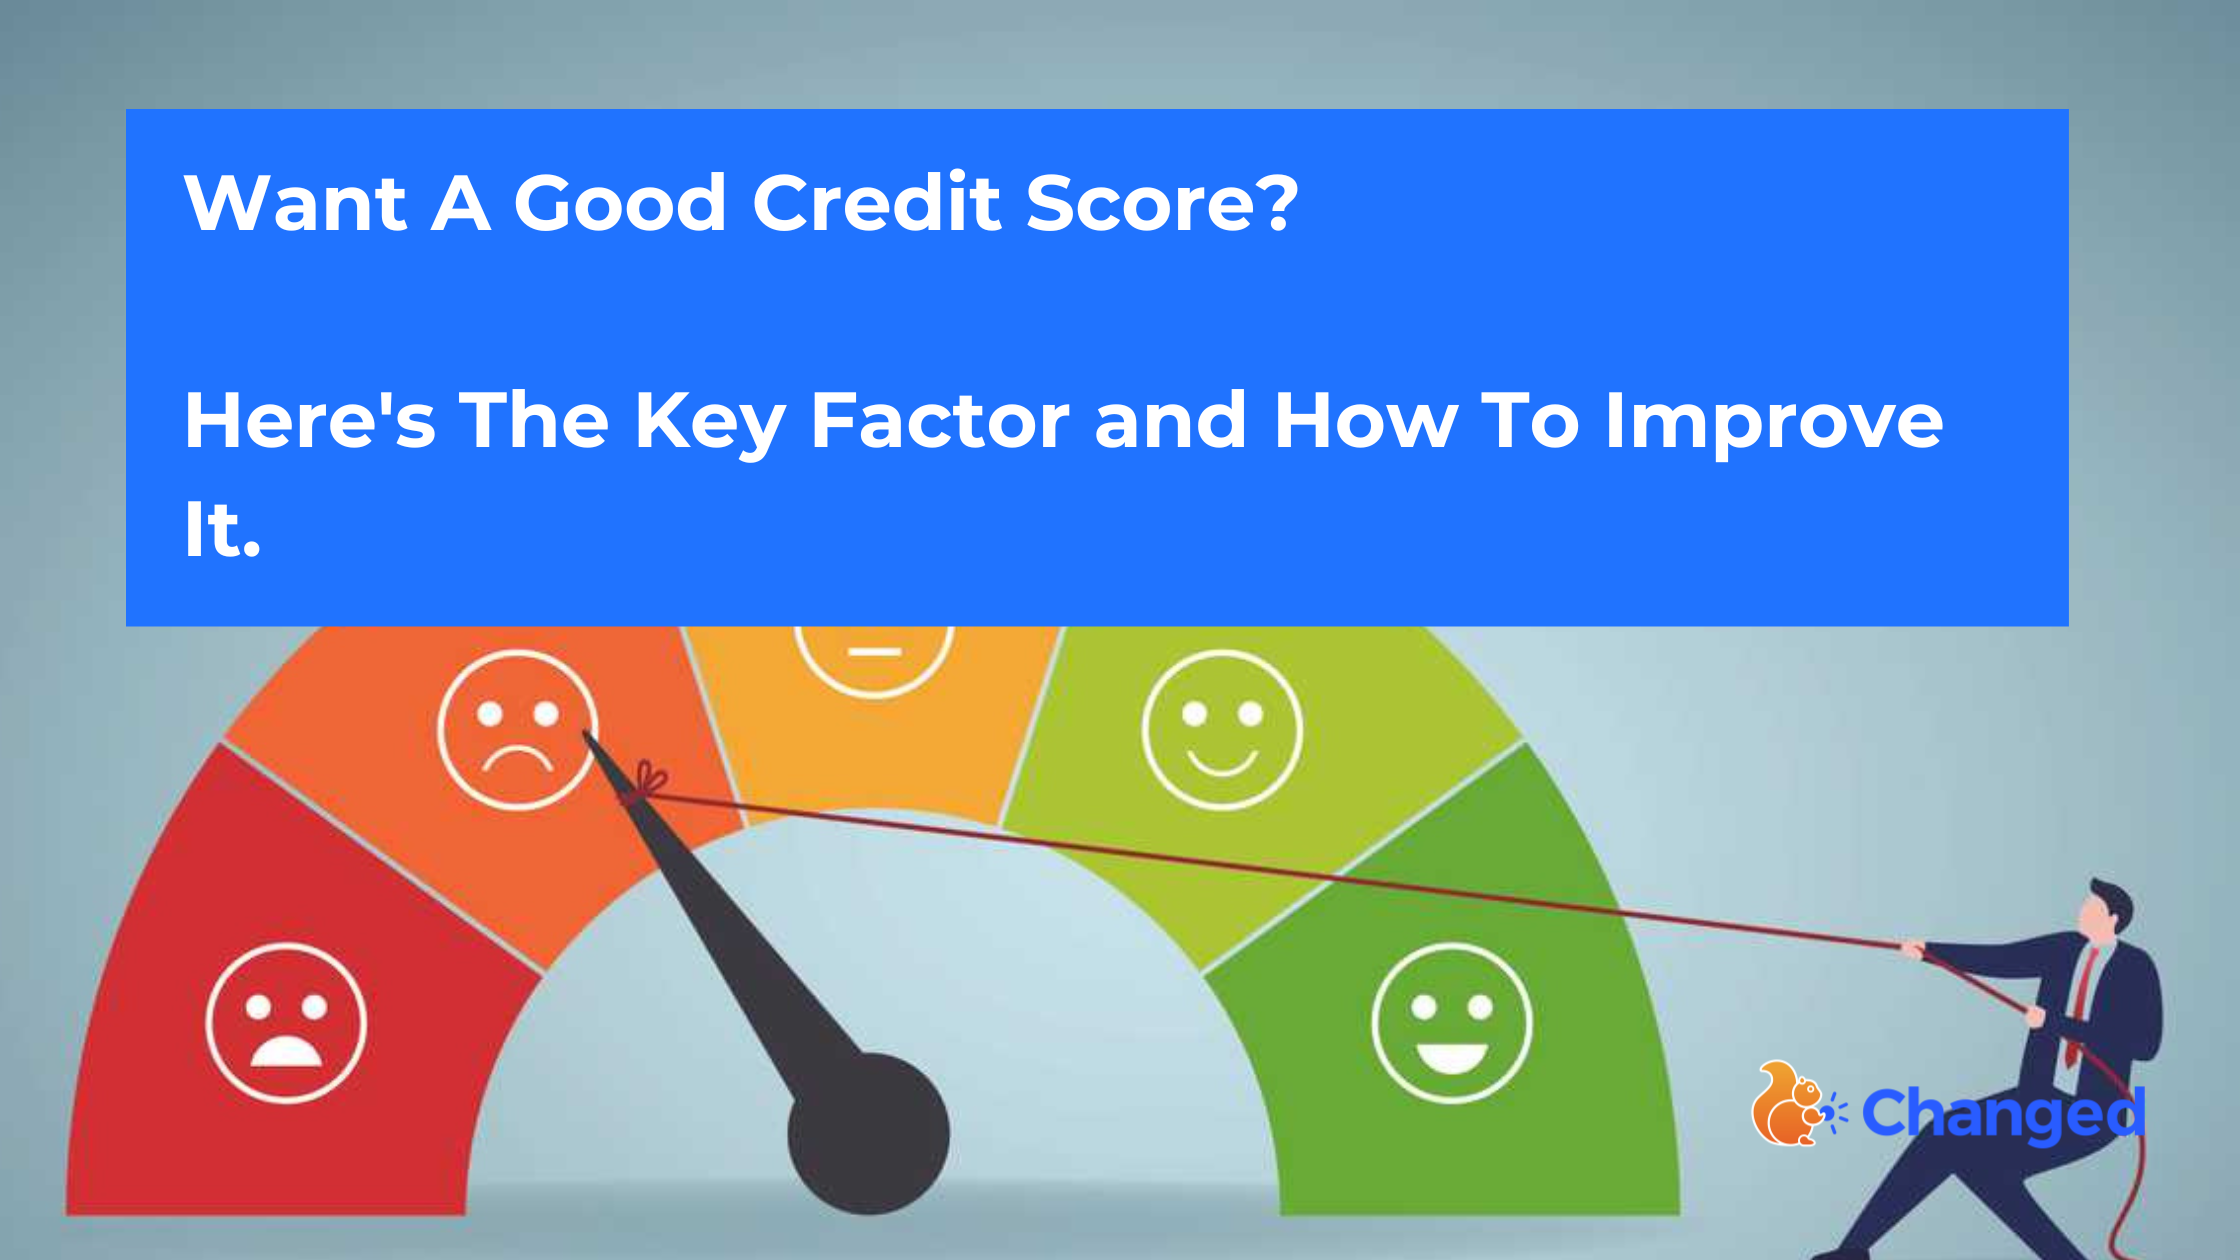 Want A Good Credit Score? Here's The Key Factor.